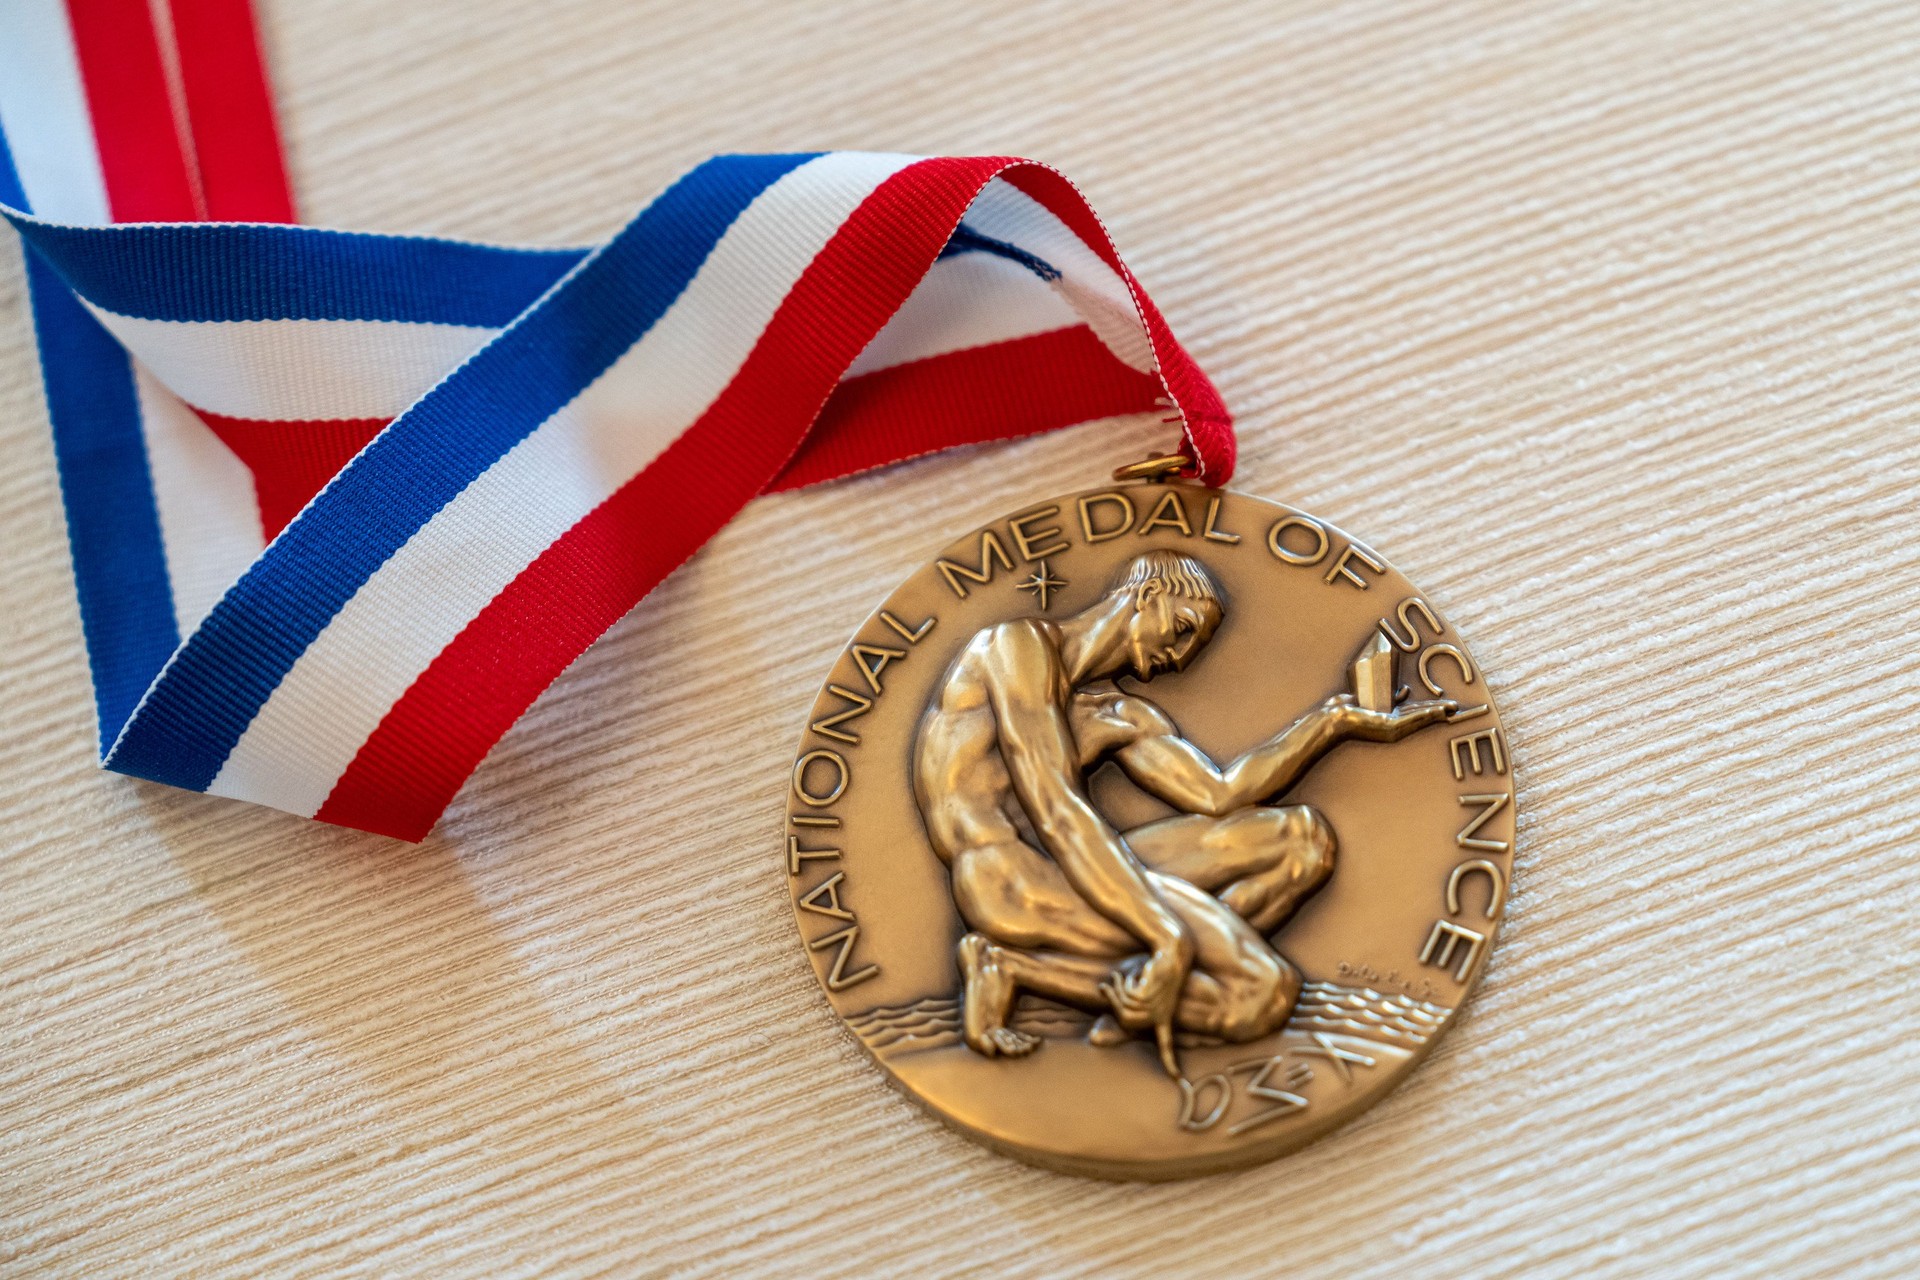 National Medal of Science on a table